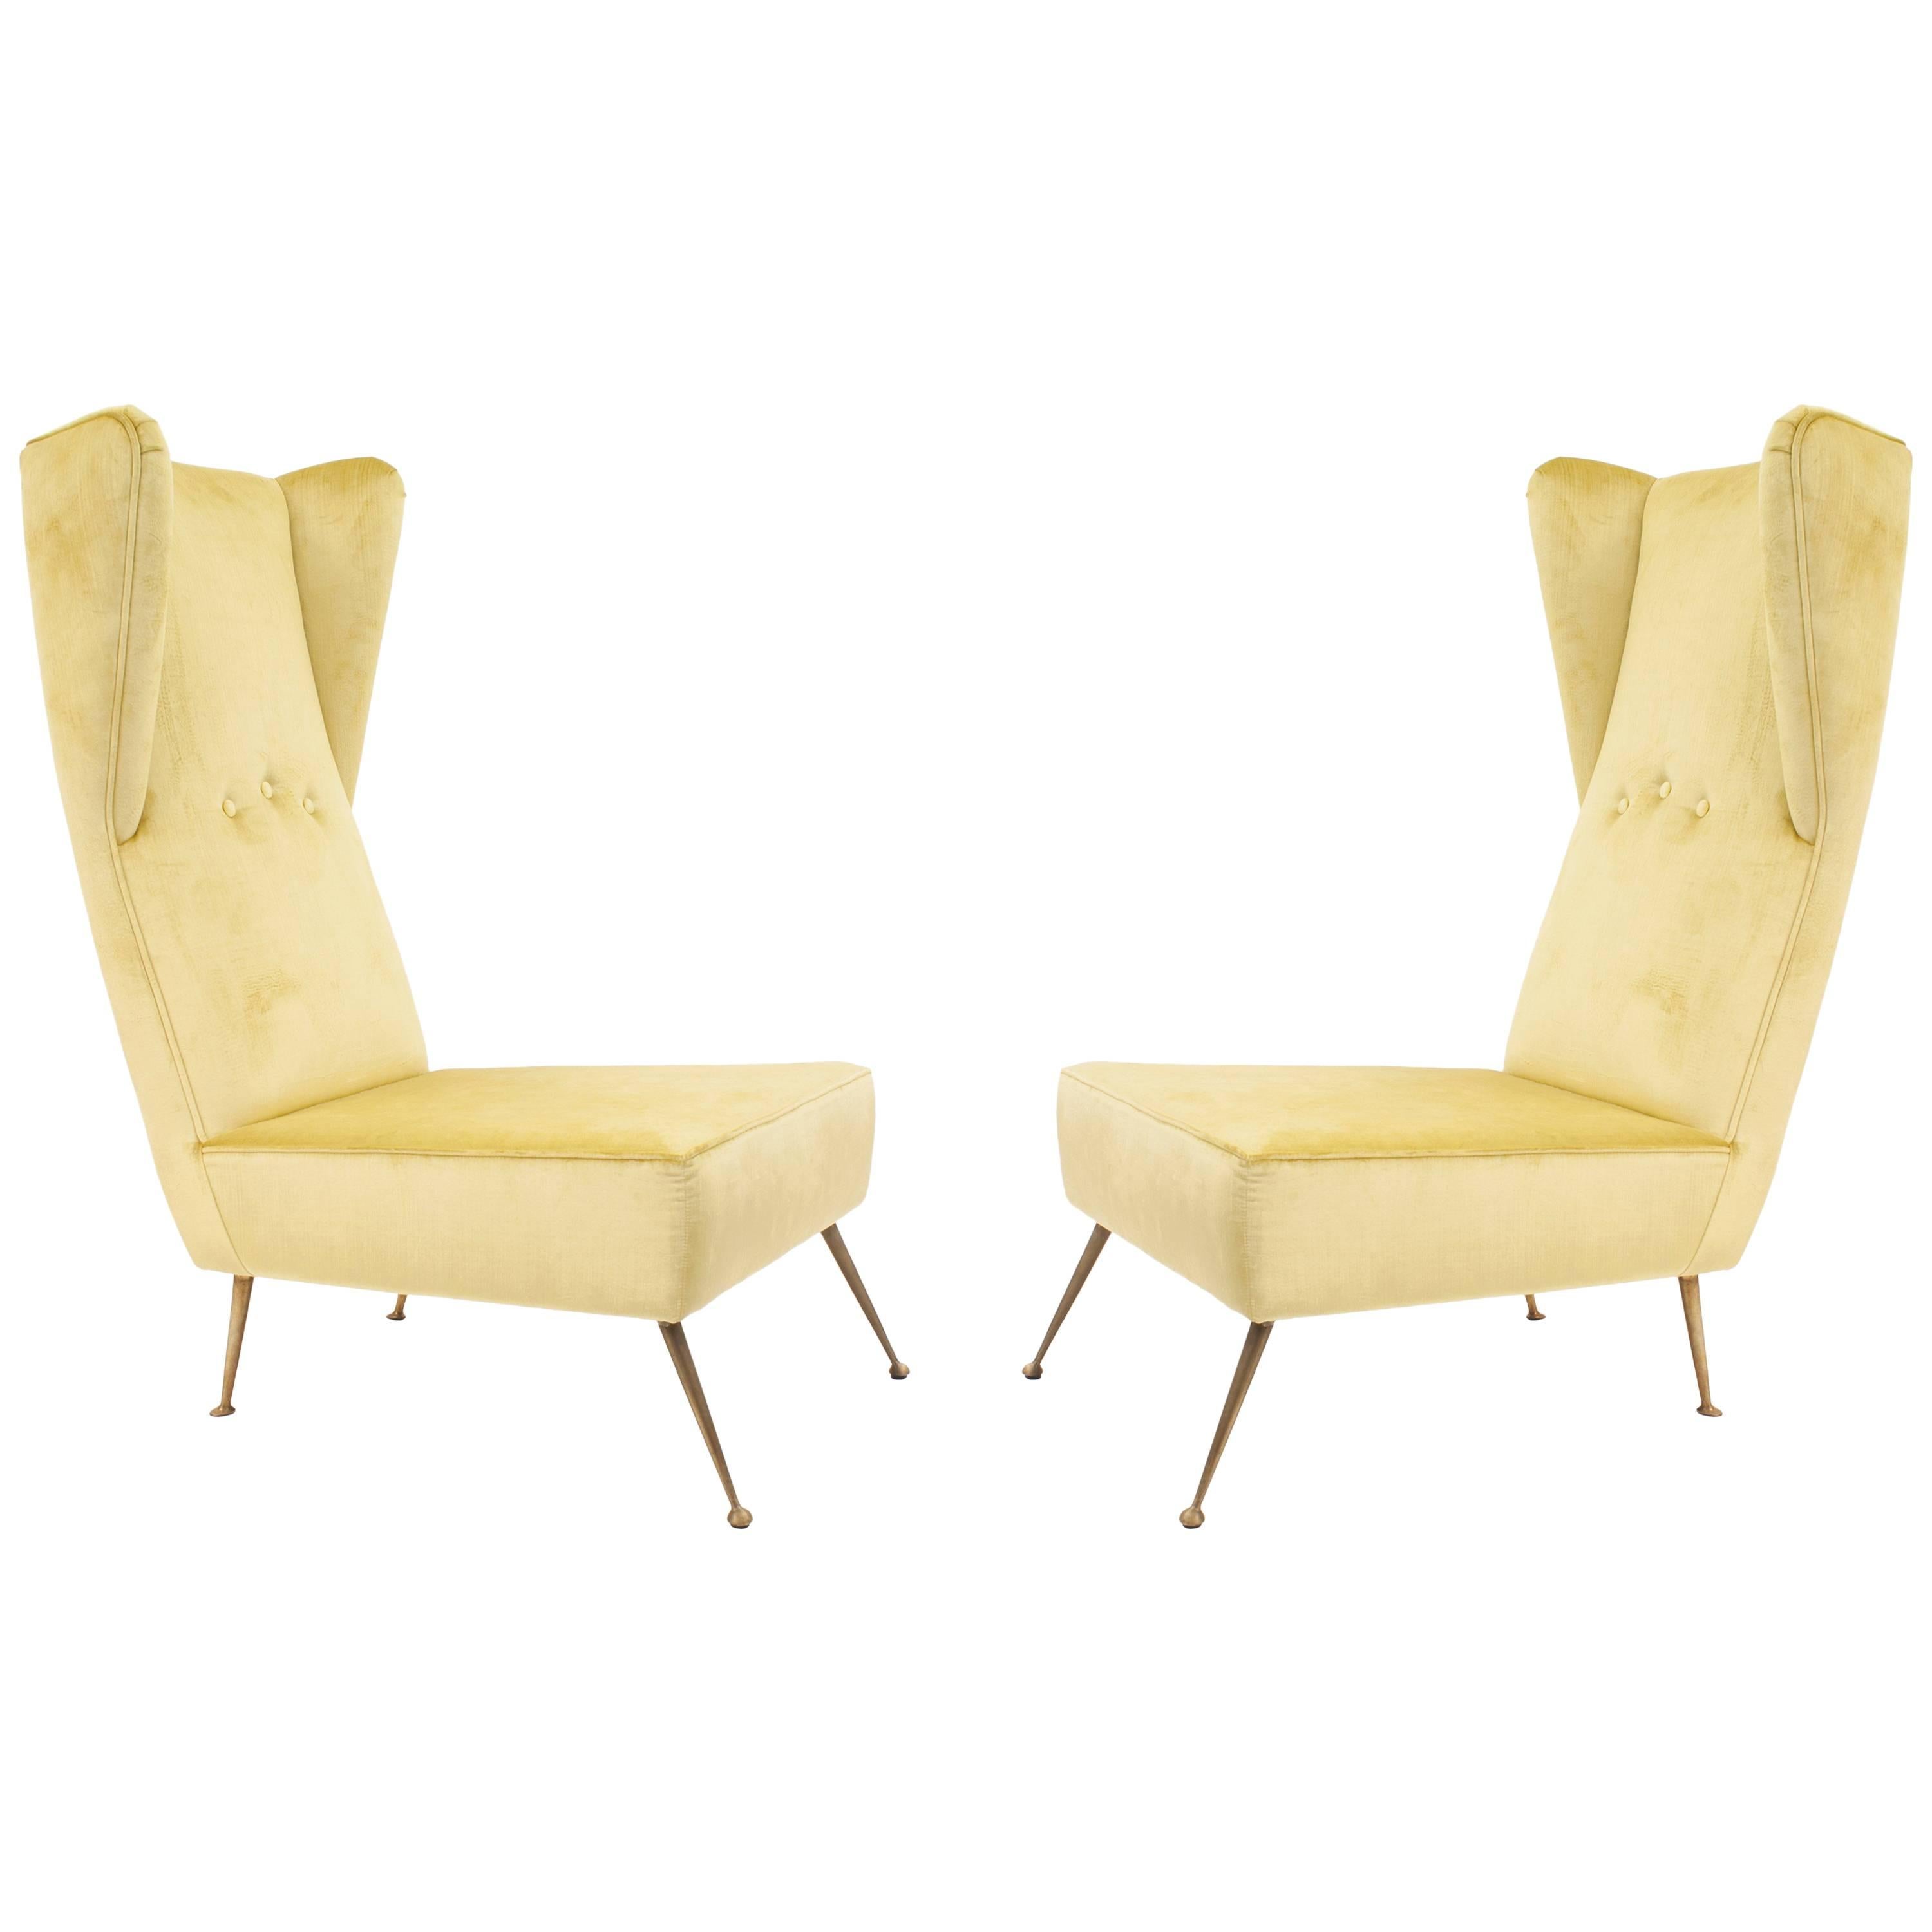 Pair of Italian Post-War '1950s' High Wing Back Side Chairs